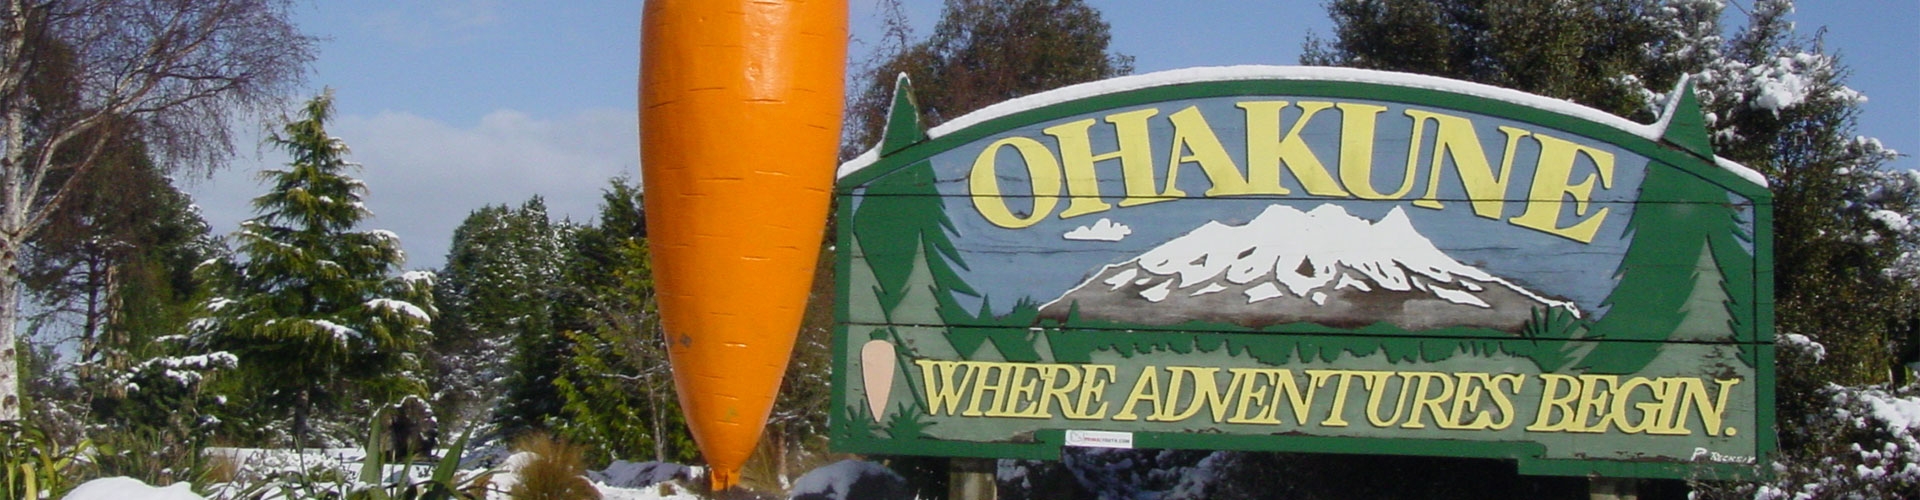 accommodation in central Ohakune